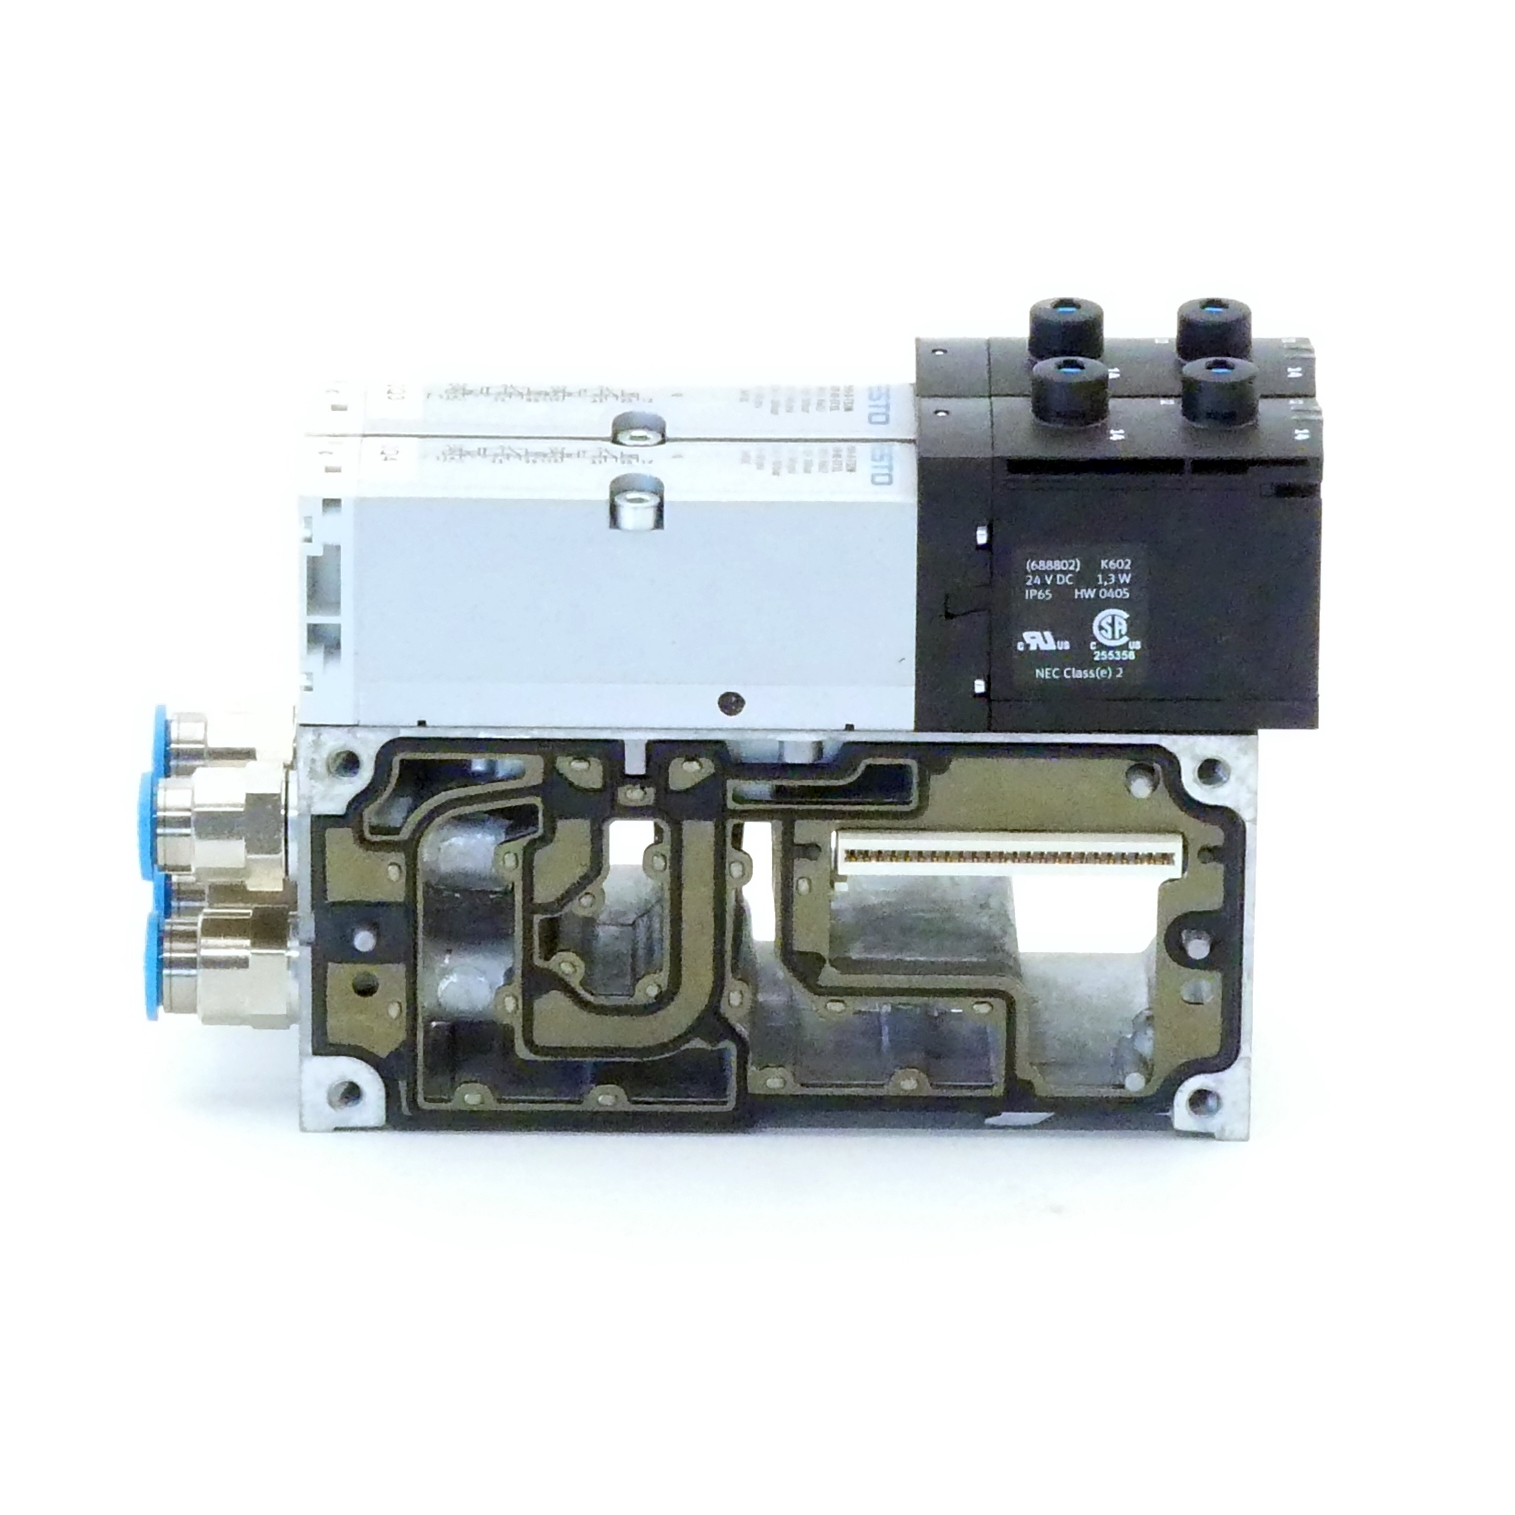 Solenoid valve with manifold plate 32N-AZD-A1-1T1L; VABV-S4-1HS-G14-2T2 